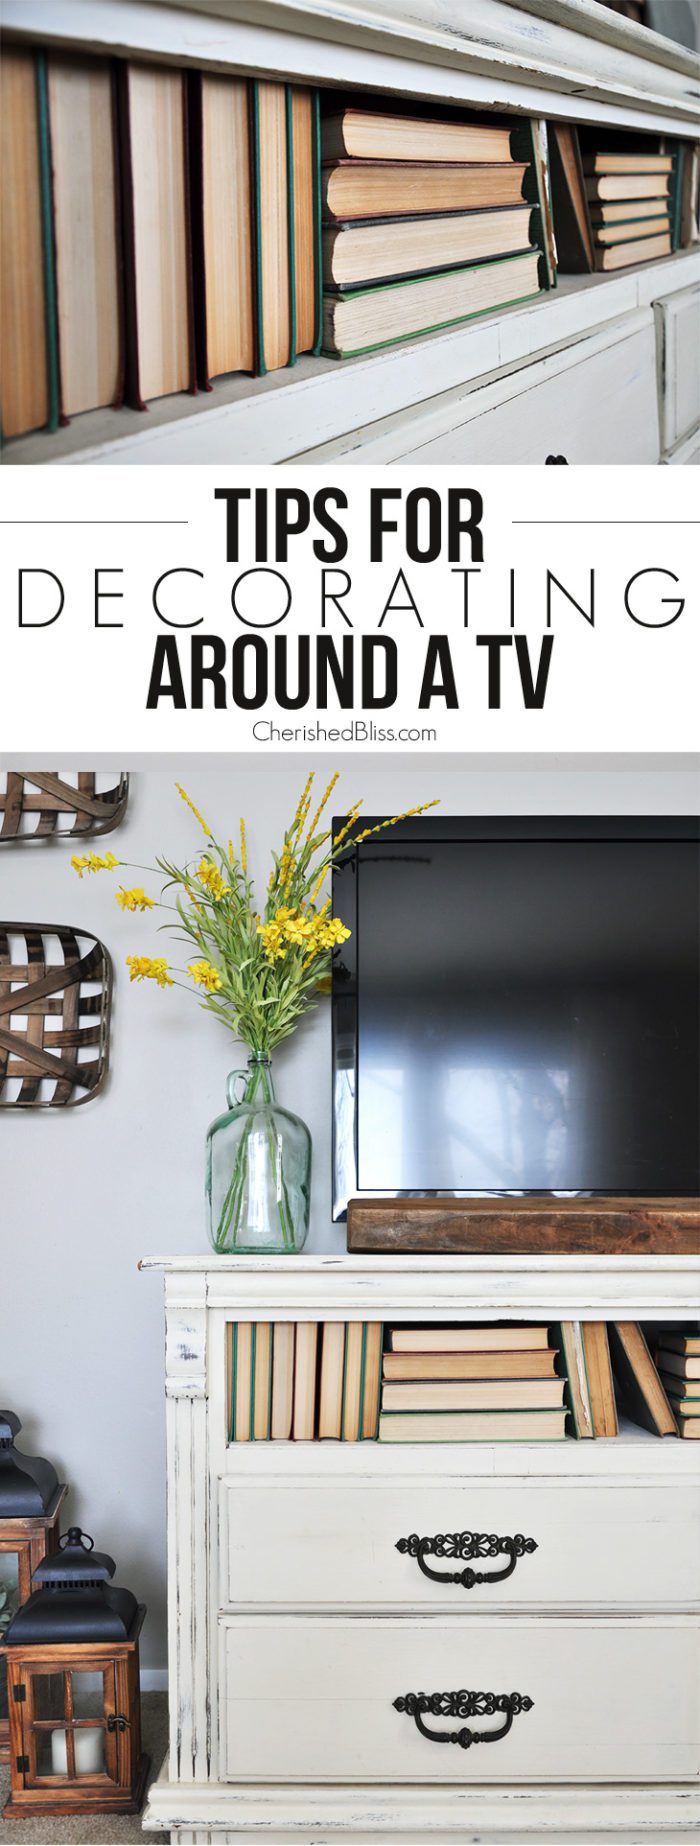 With these simple tips and tricks you will learn how to easily decorate around a tv to give your living room the look you desire!